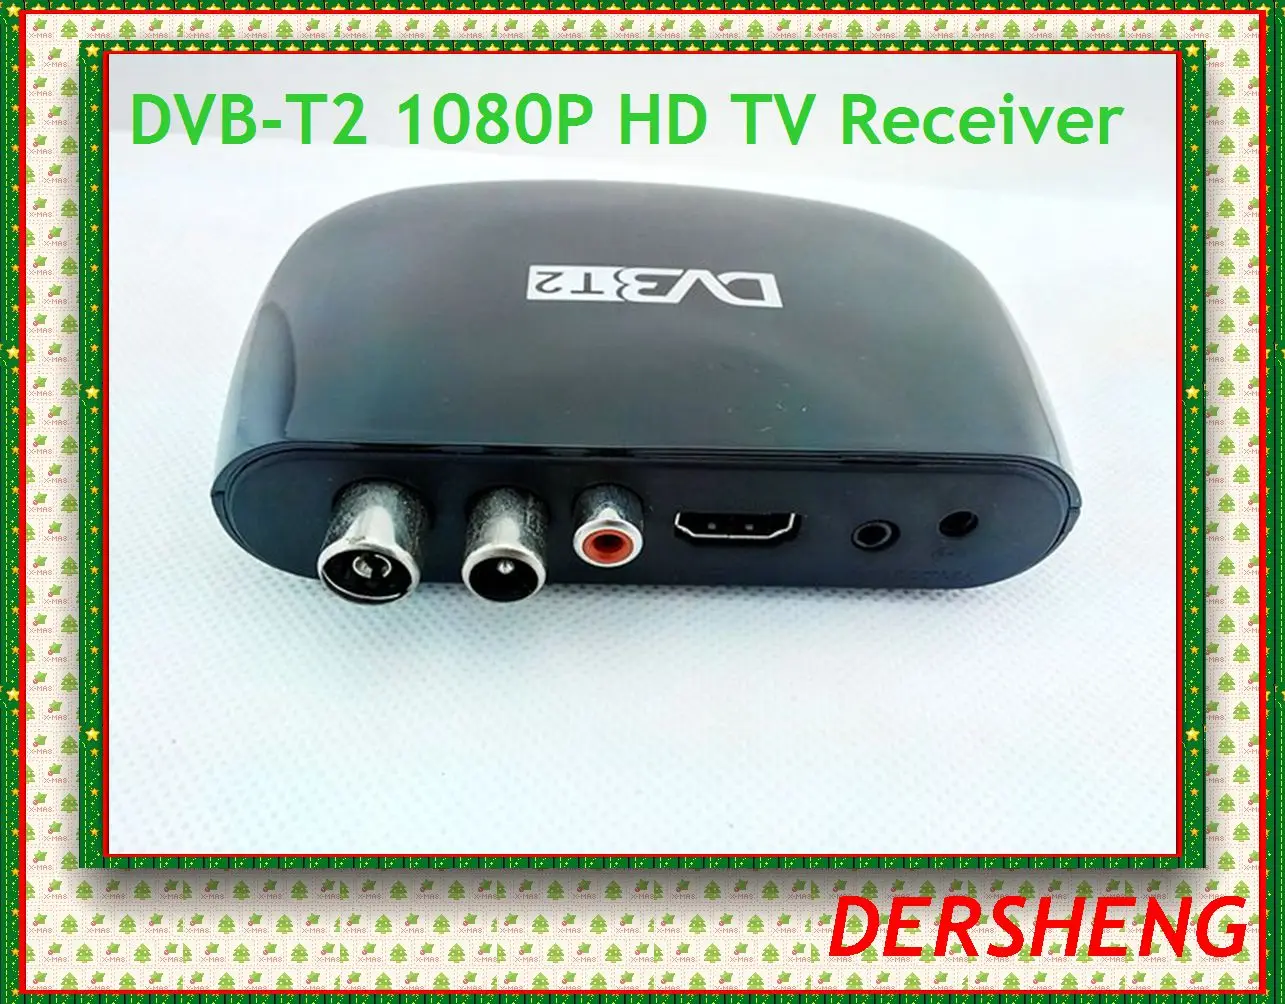 New DVB-T2 Tuner Receiver HD 1080P Satellite Decoder TV Tuner DVB T2 DVB  USB Built-in Russian Manual For Monitor Adapter external hd tv box digital computer program receiver tuner with speaker support crt lcd monitor video cable for tv computer